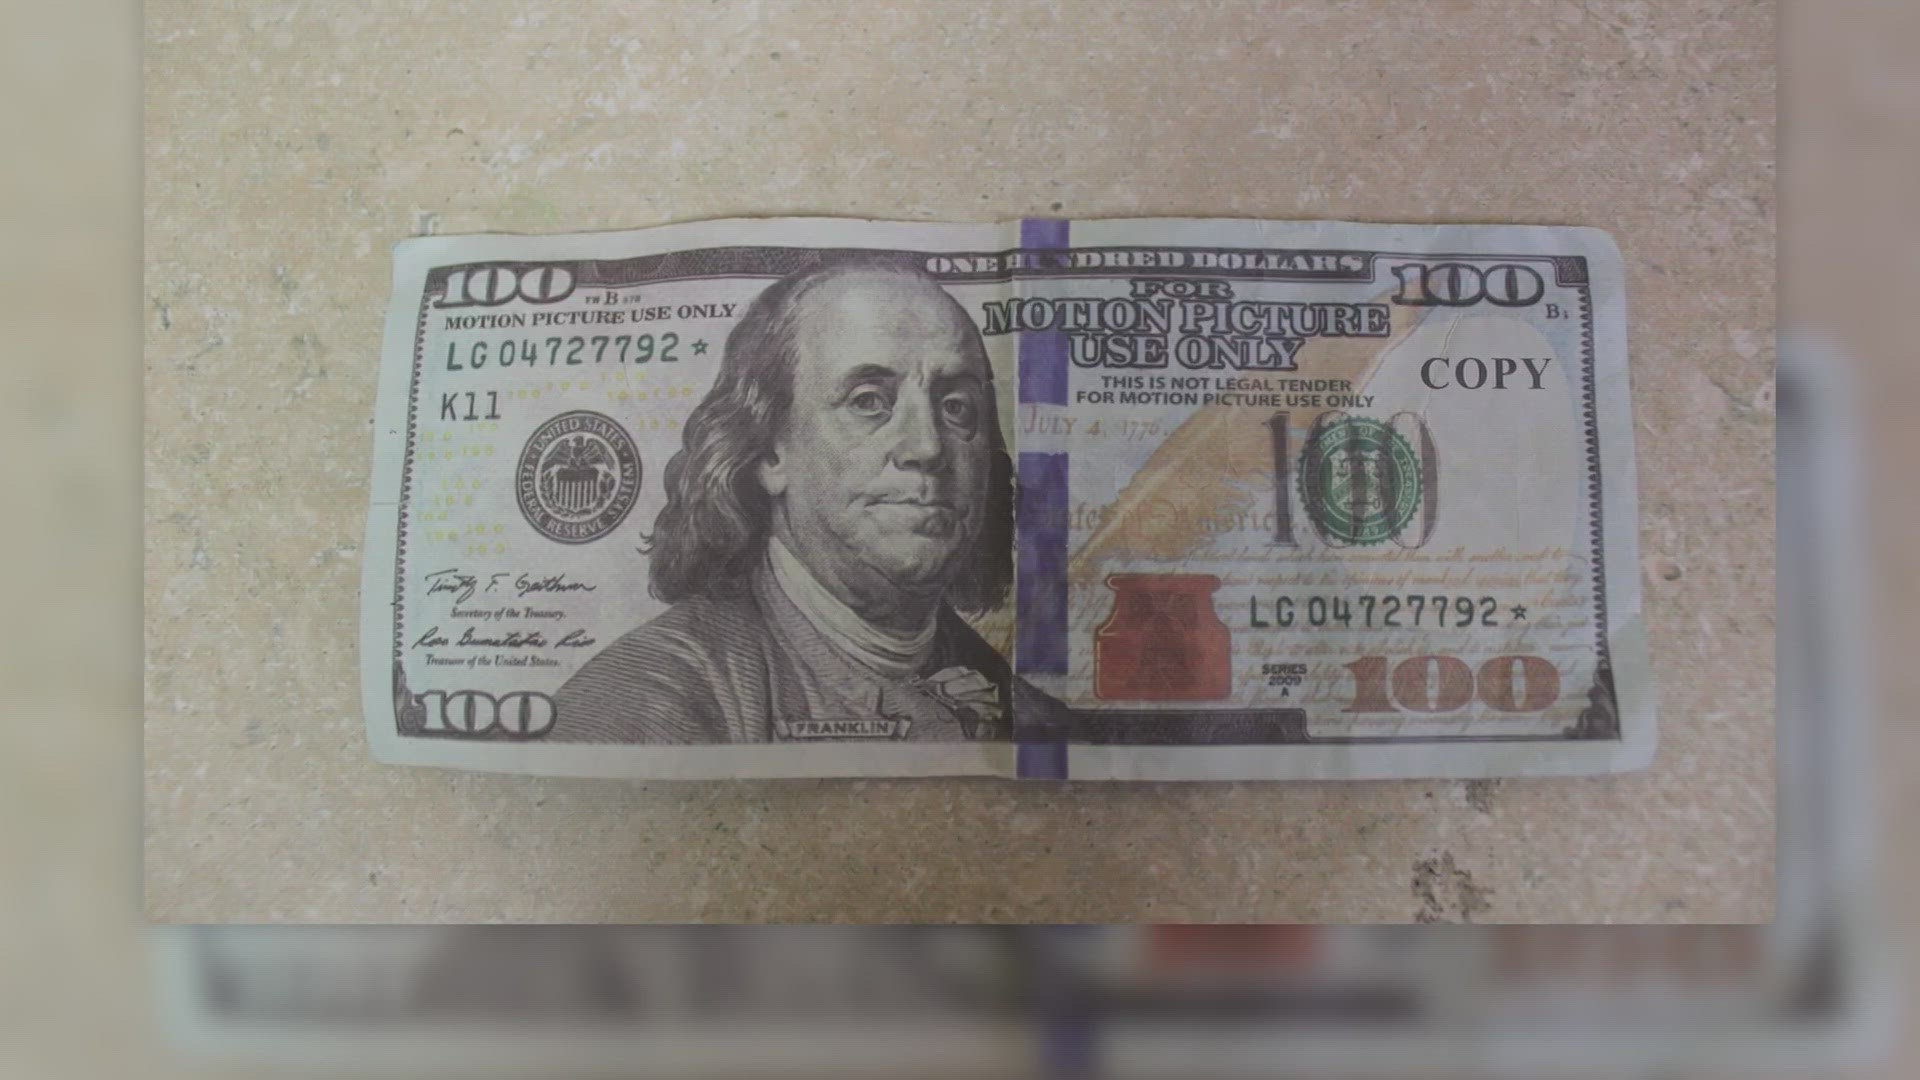 Police say the fake $100 bill was used at a yard sale over the weekend.